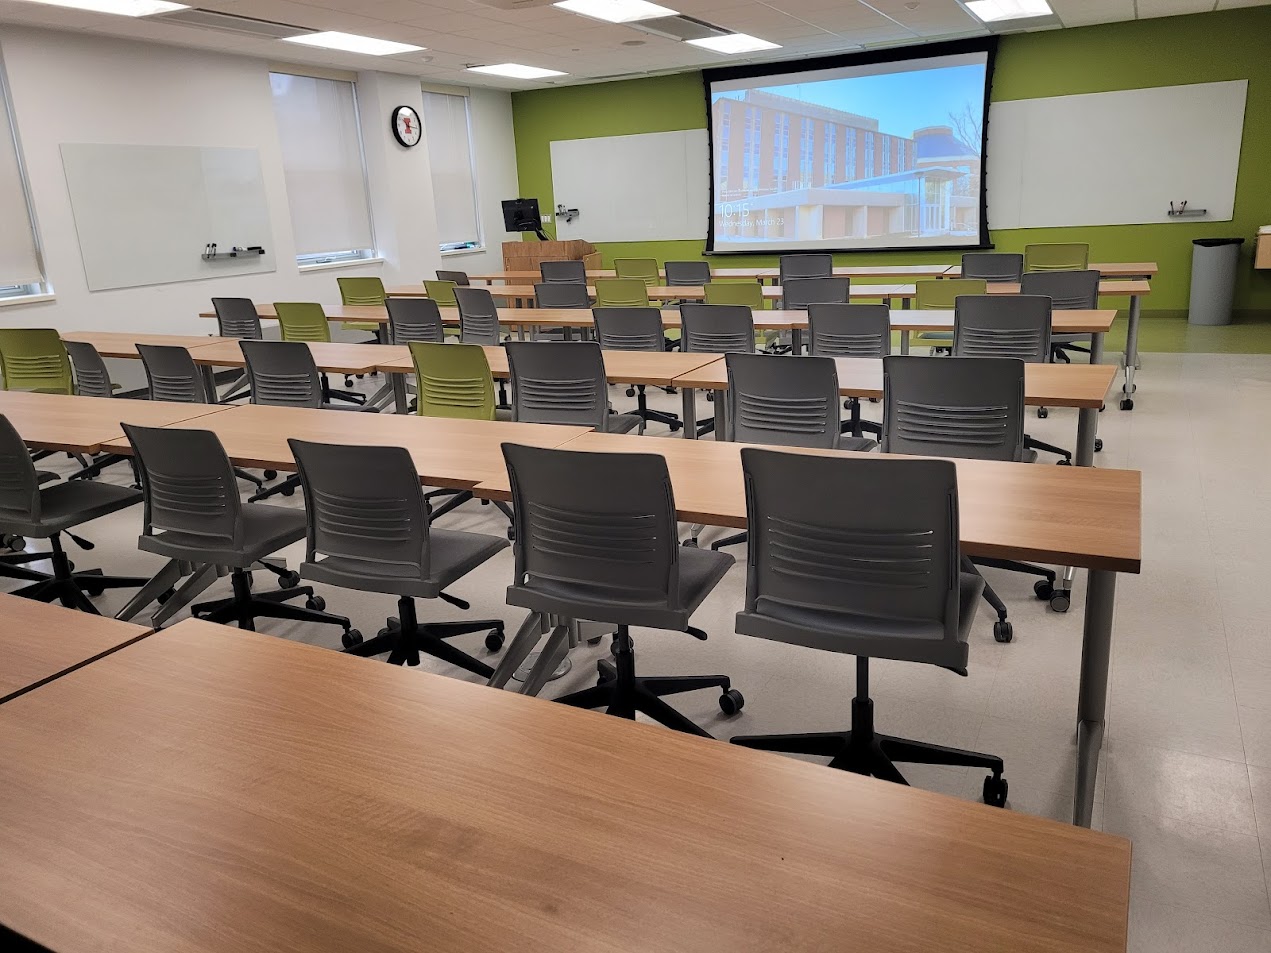 This is a view of the room, with student desks, a front lecture table, and a whiteboard.